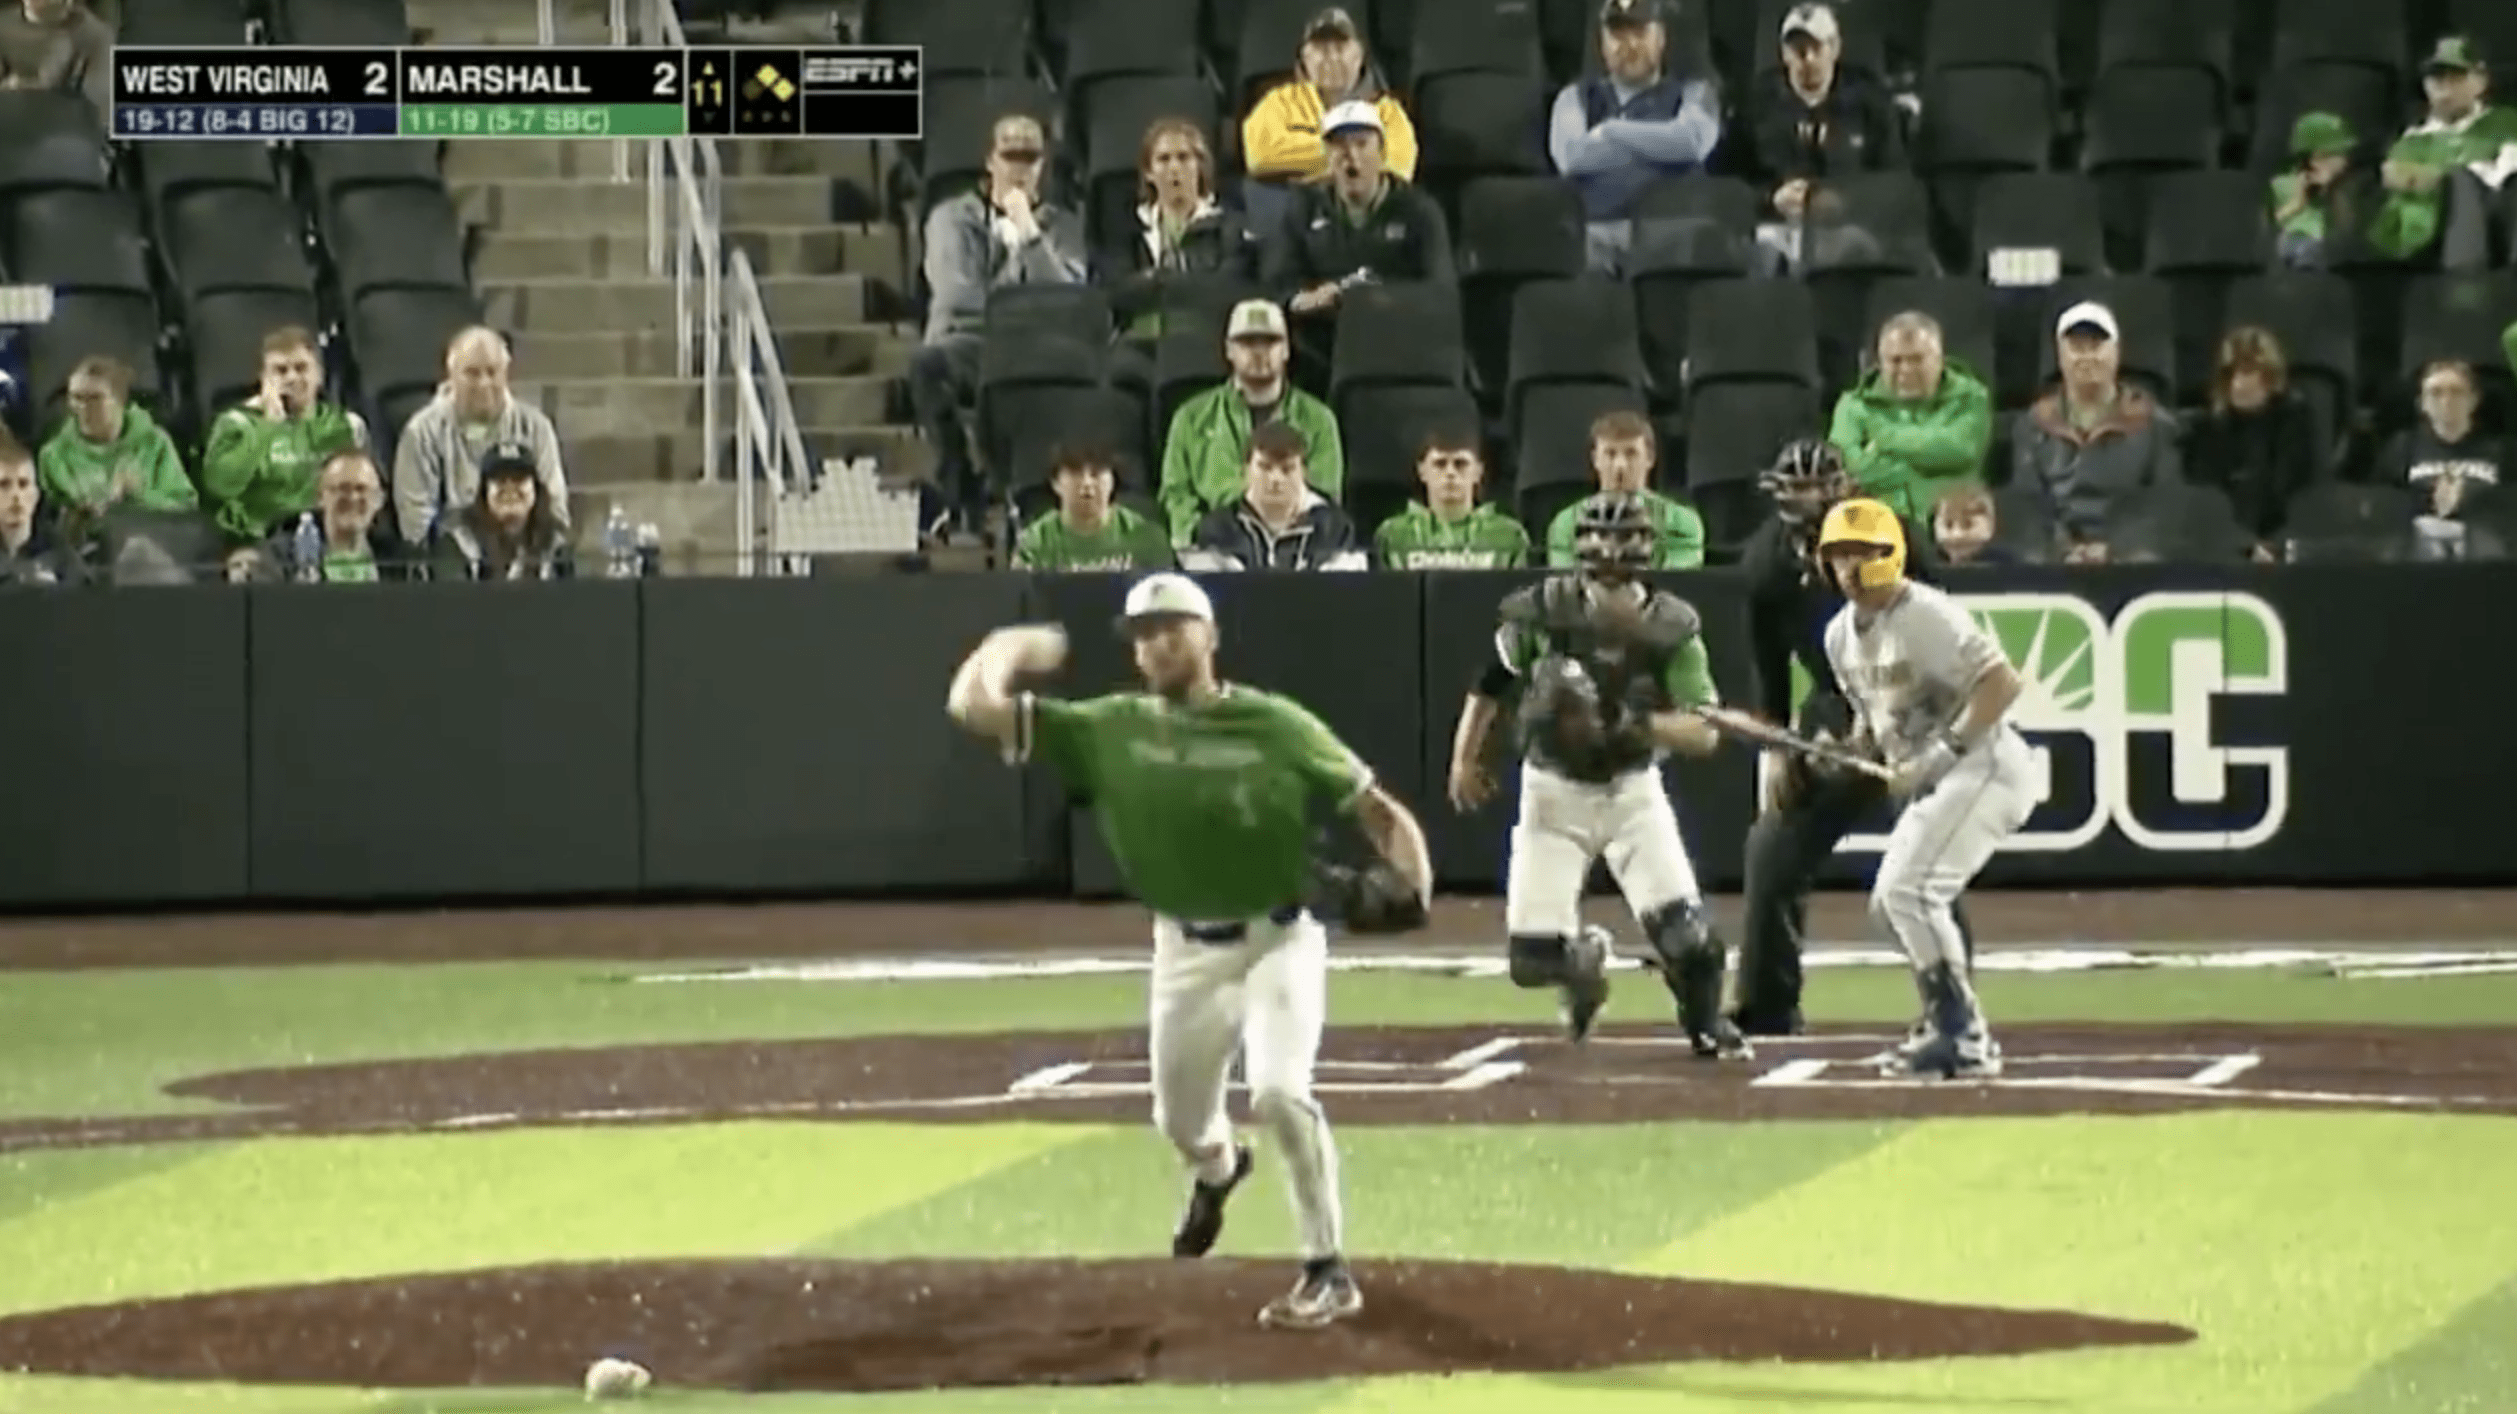 College Pitcher Gets Out of 11th-Inning Jam With Crafty Double Pickoff